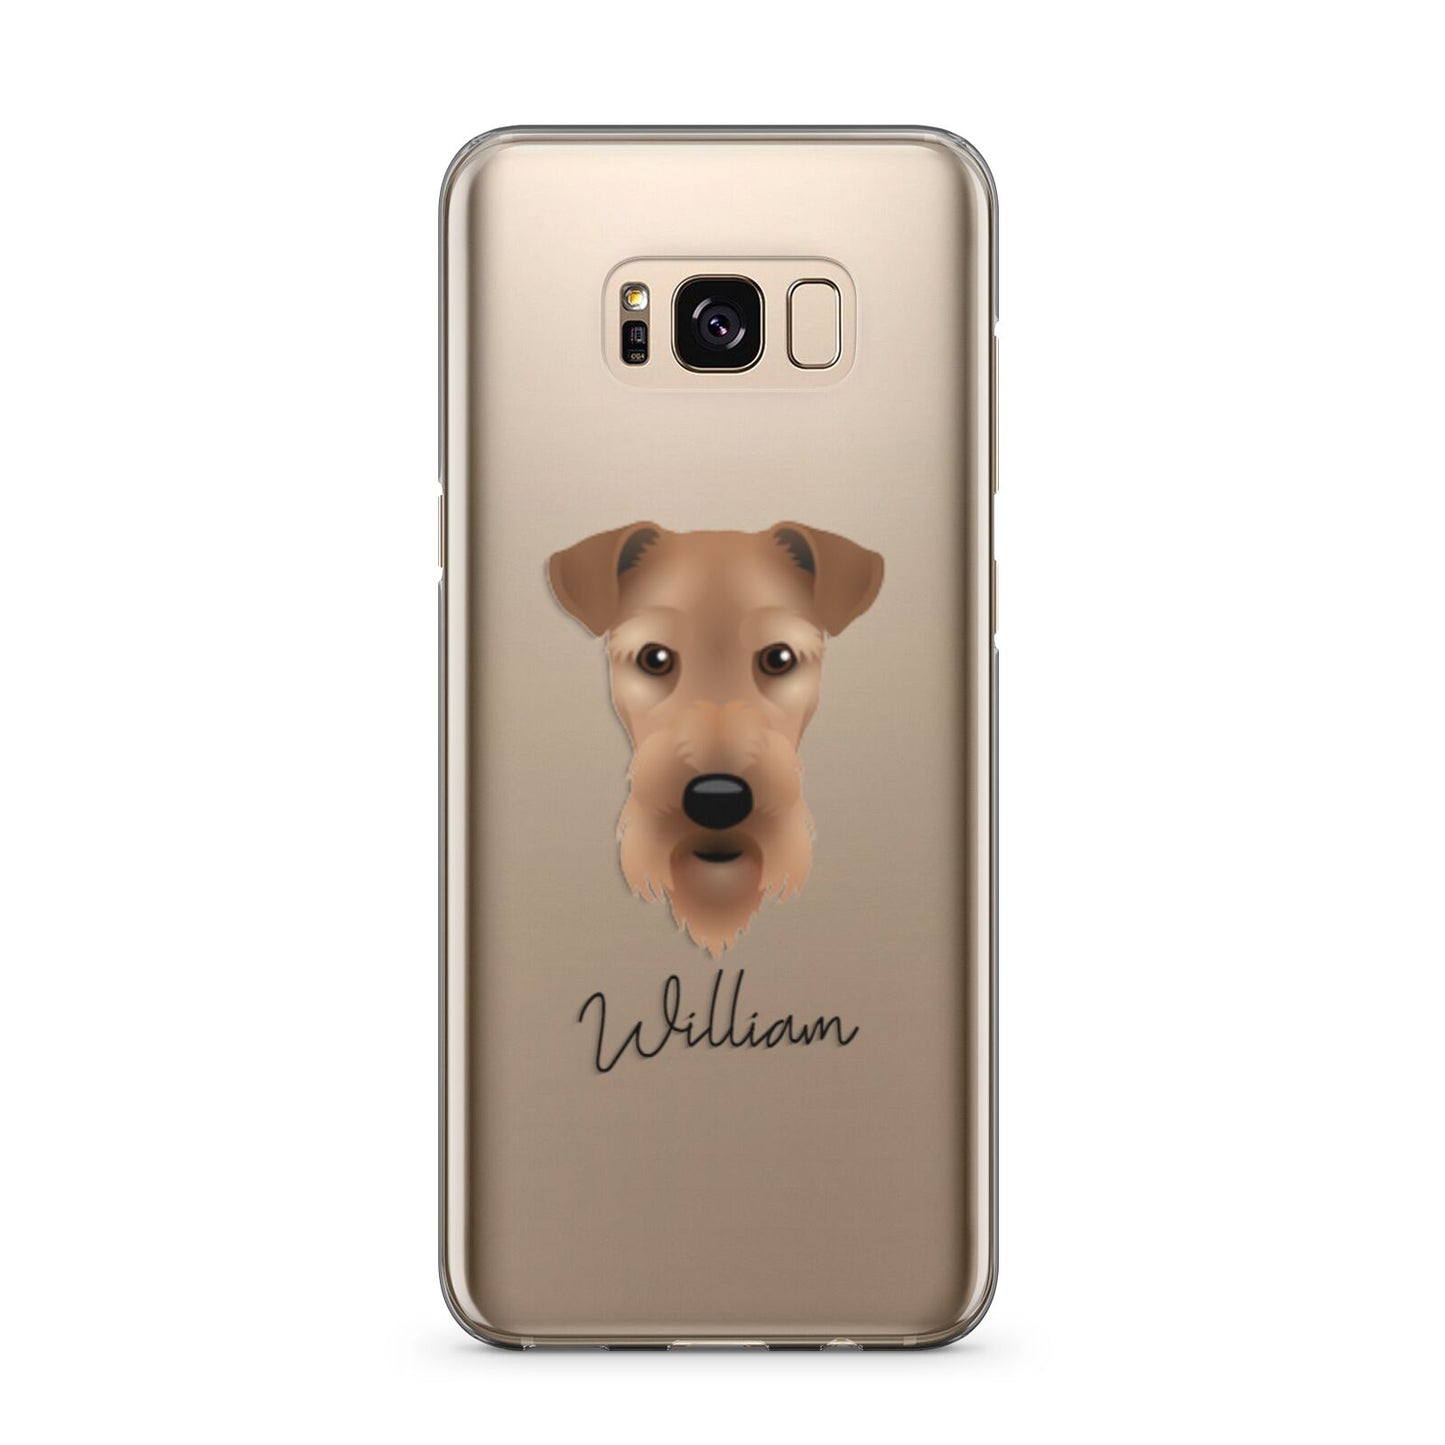 Airedale Terrier Personalised Samsung Galaxy S8 Plus Case